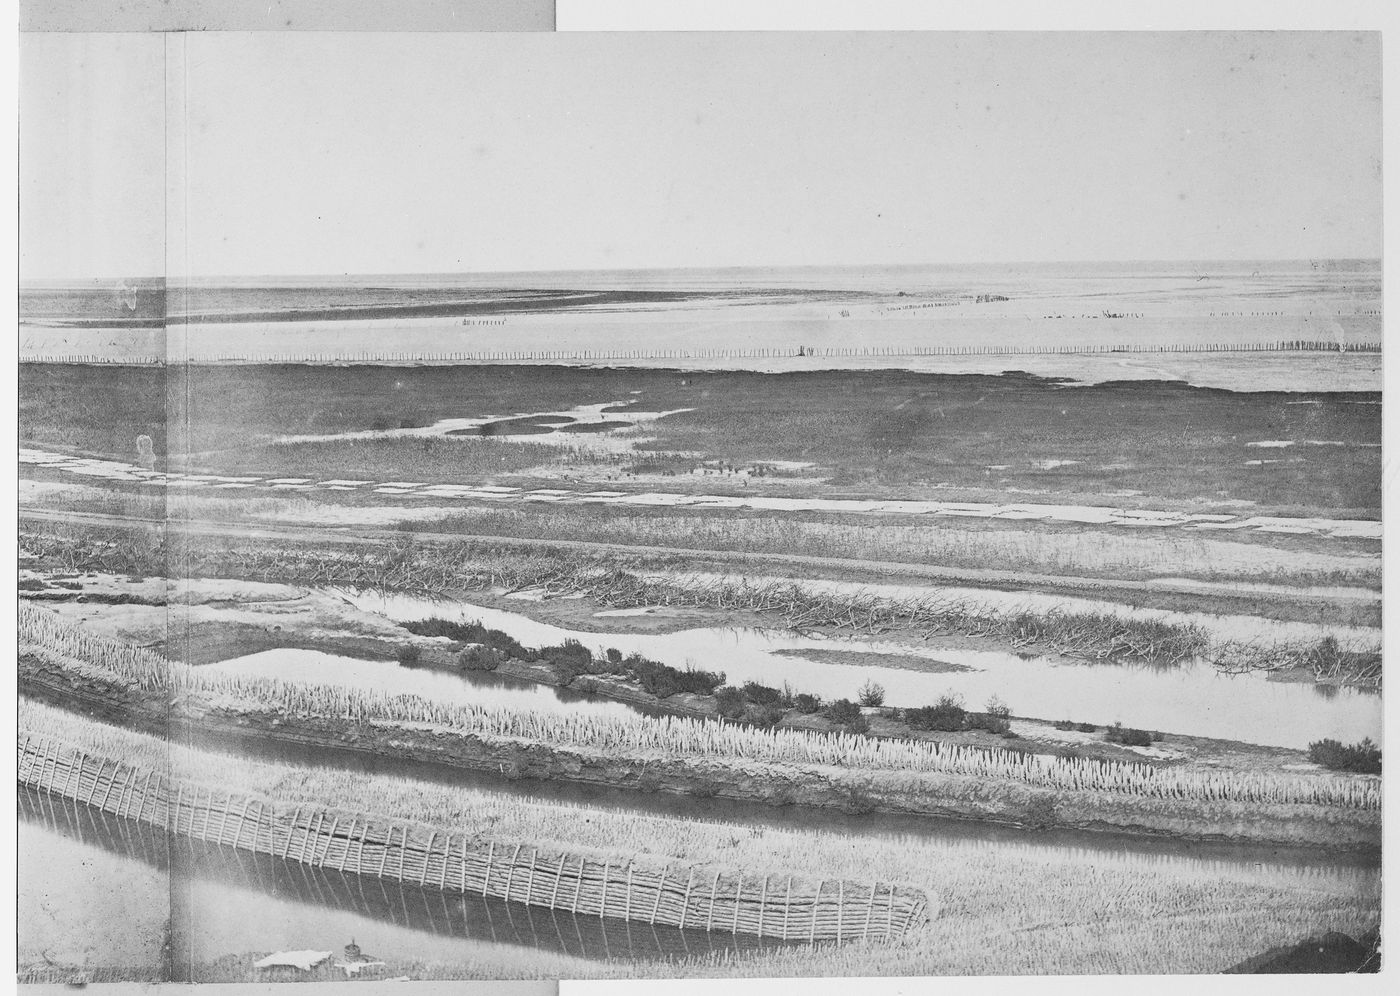 View showing part of the outworks of the Great South Taku Fort and the Pei (now Hai) River delta, Taku (now Dagu), near Tientsin (now Tianjin), China